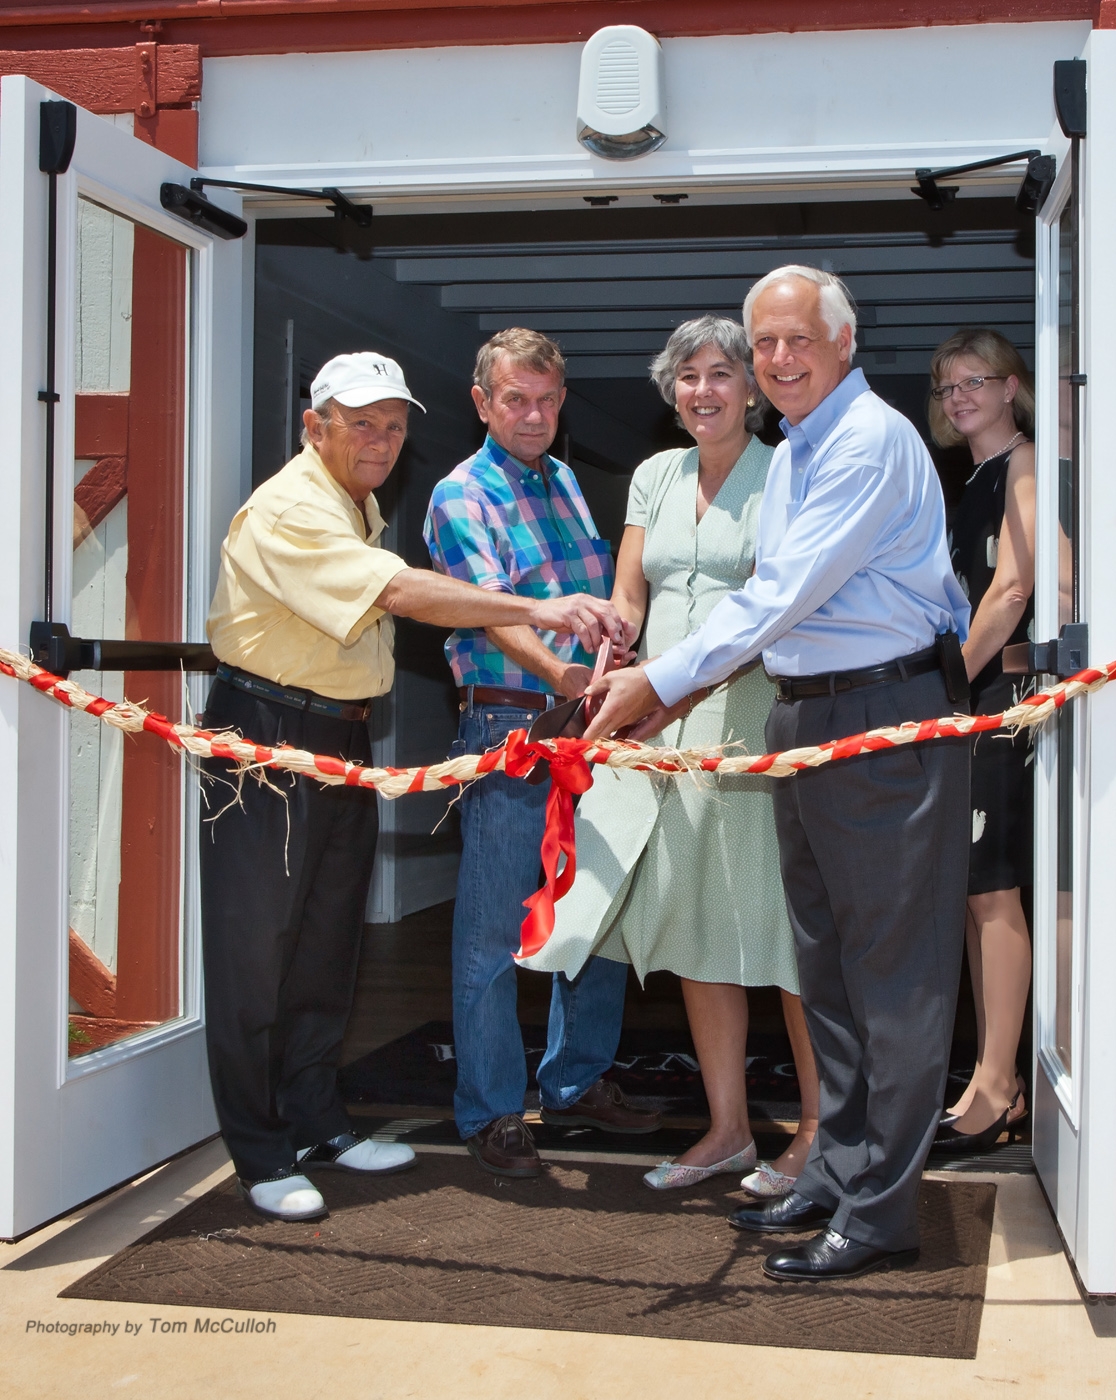 WinMock Ribbon Cutting - (L to R) William Burnette of Hillsdale Group, developers of Kinderton; Bert Bahnson, of Bahnson family, former owner of WinMock Barn; Jackie Wililams Kay, granddaughter of S. Clay Williams, original owner of WinMock barn; Wayne Thomas, president of Sterling Events Group, developer of WinMock at Kinderton